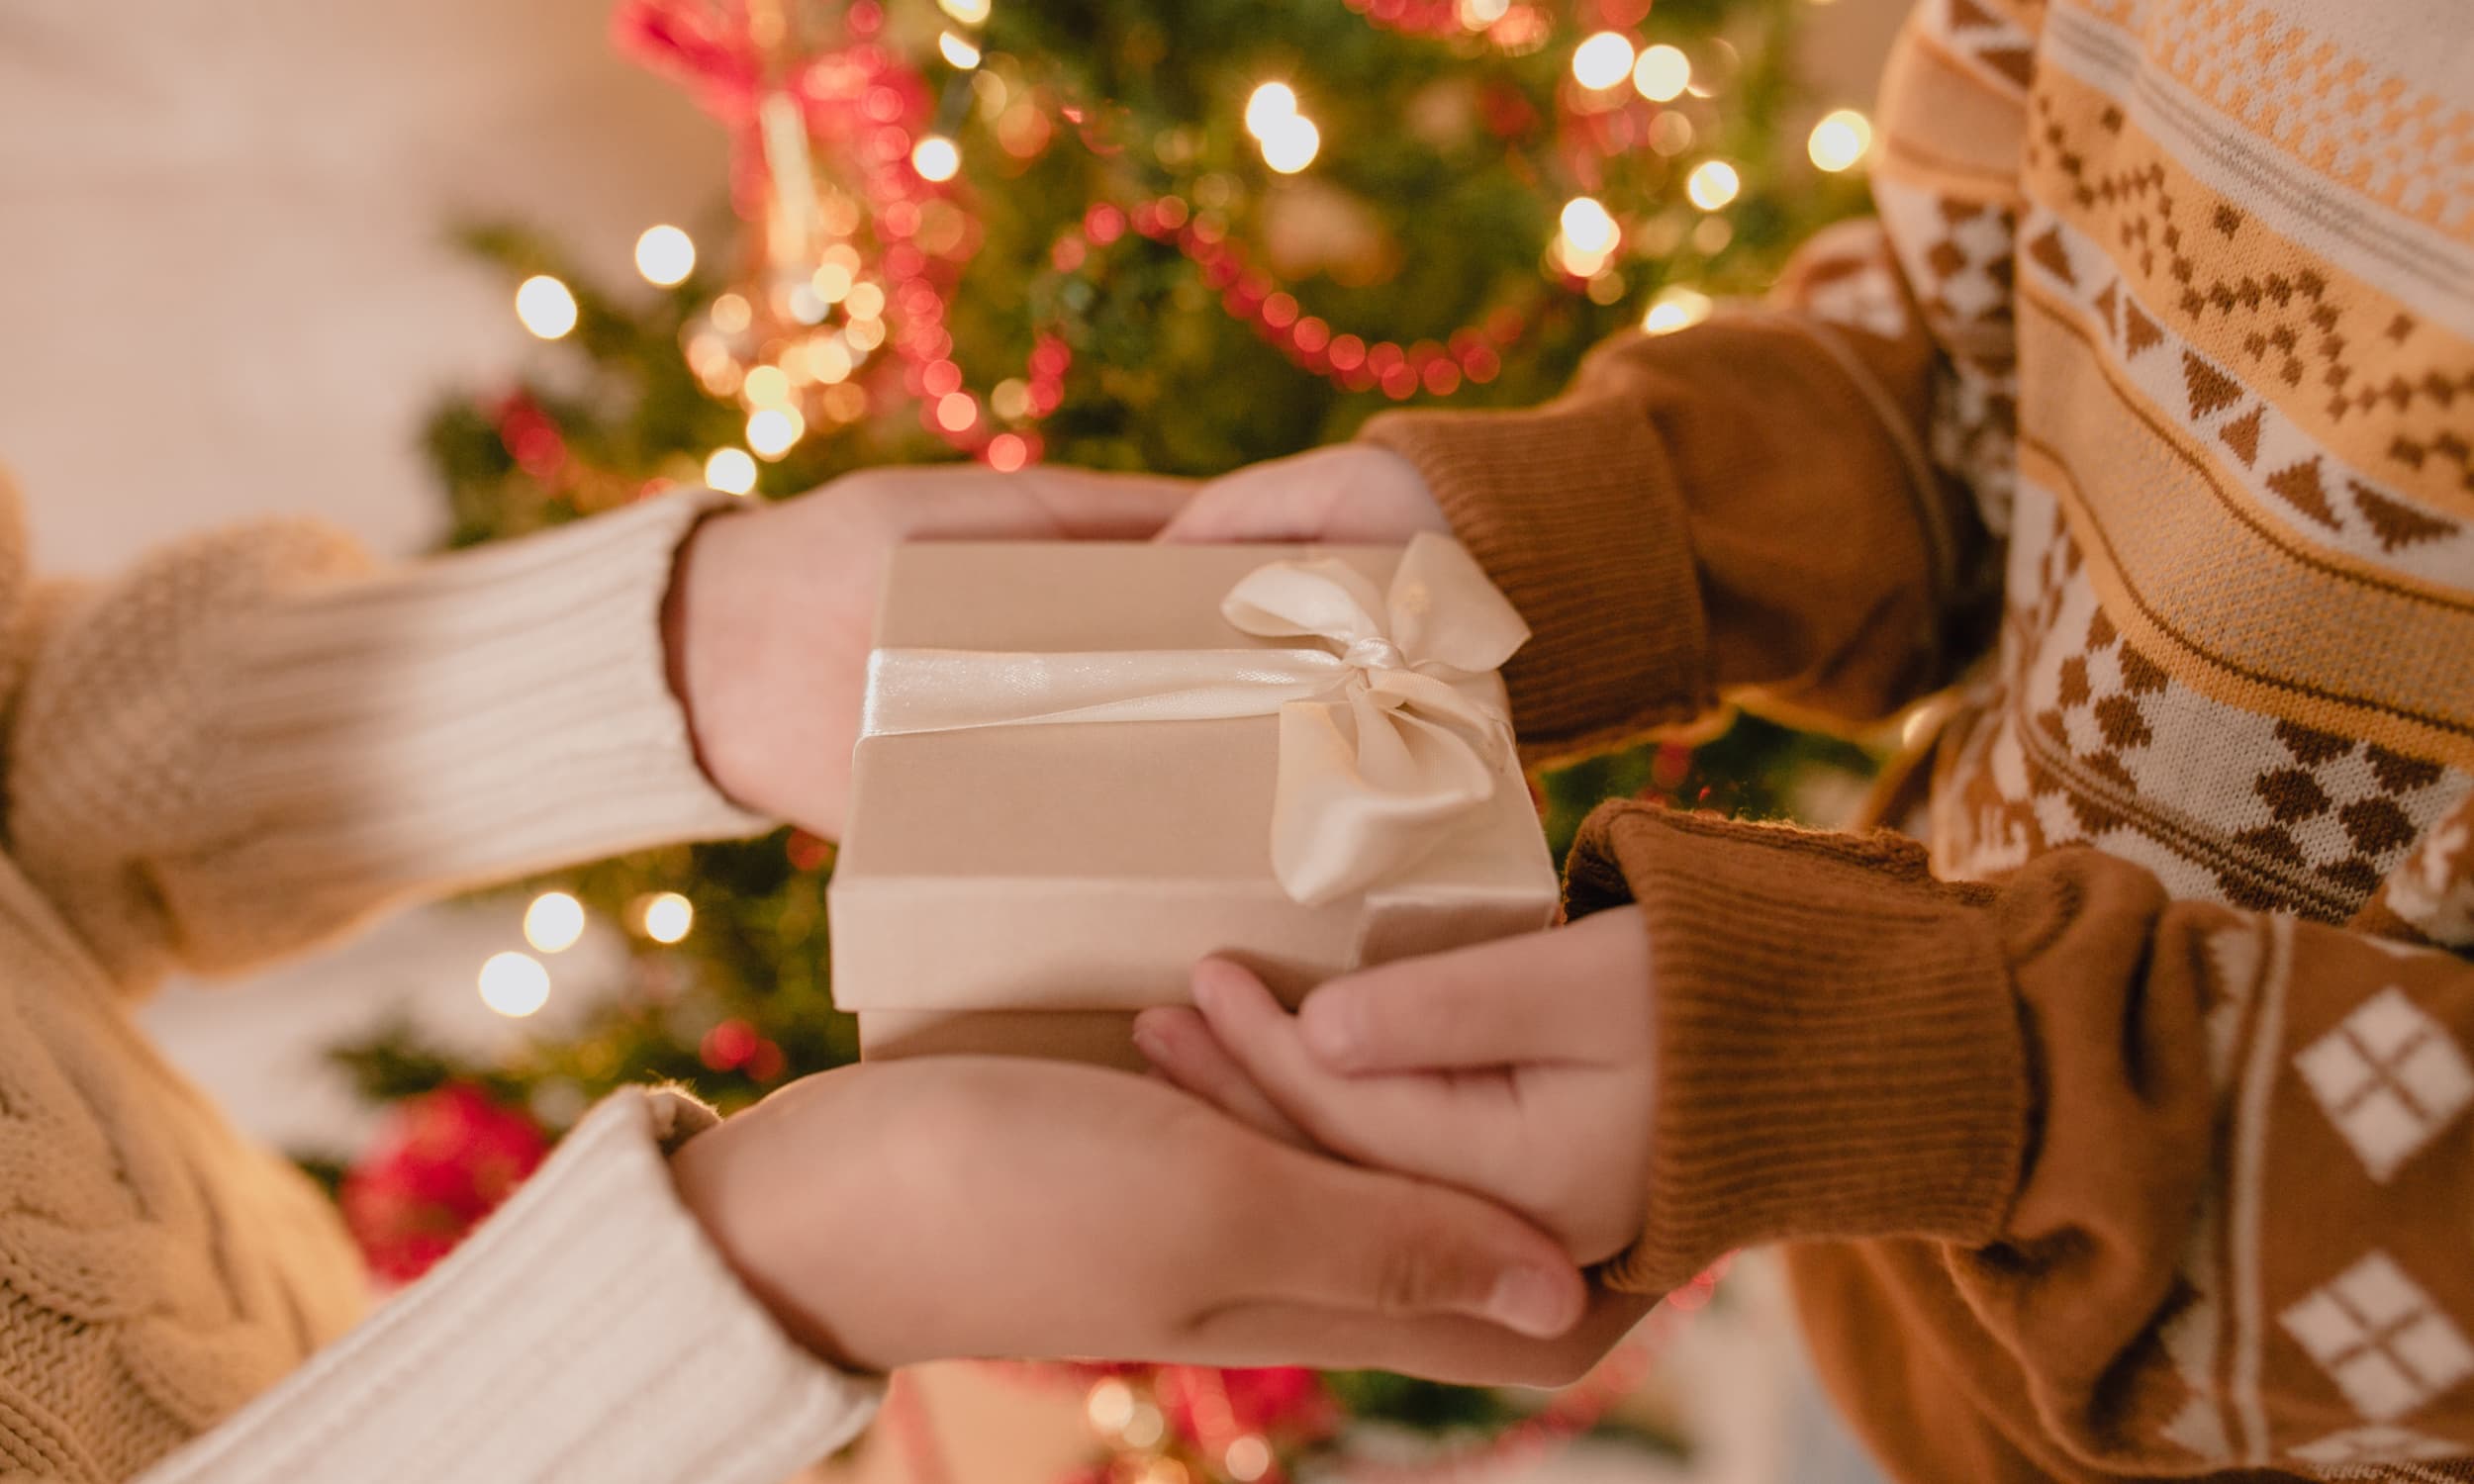 Why Do We Give Gifts?